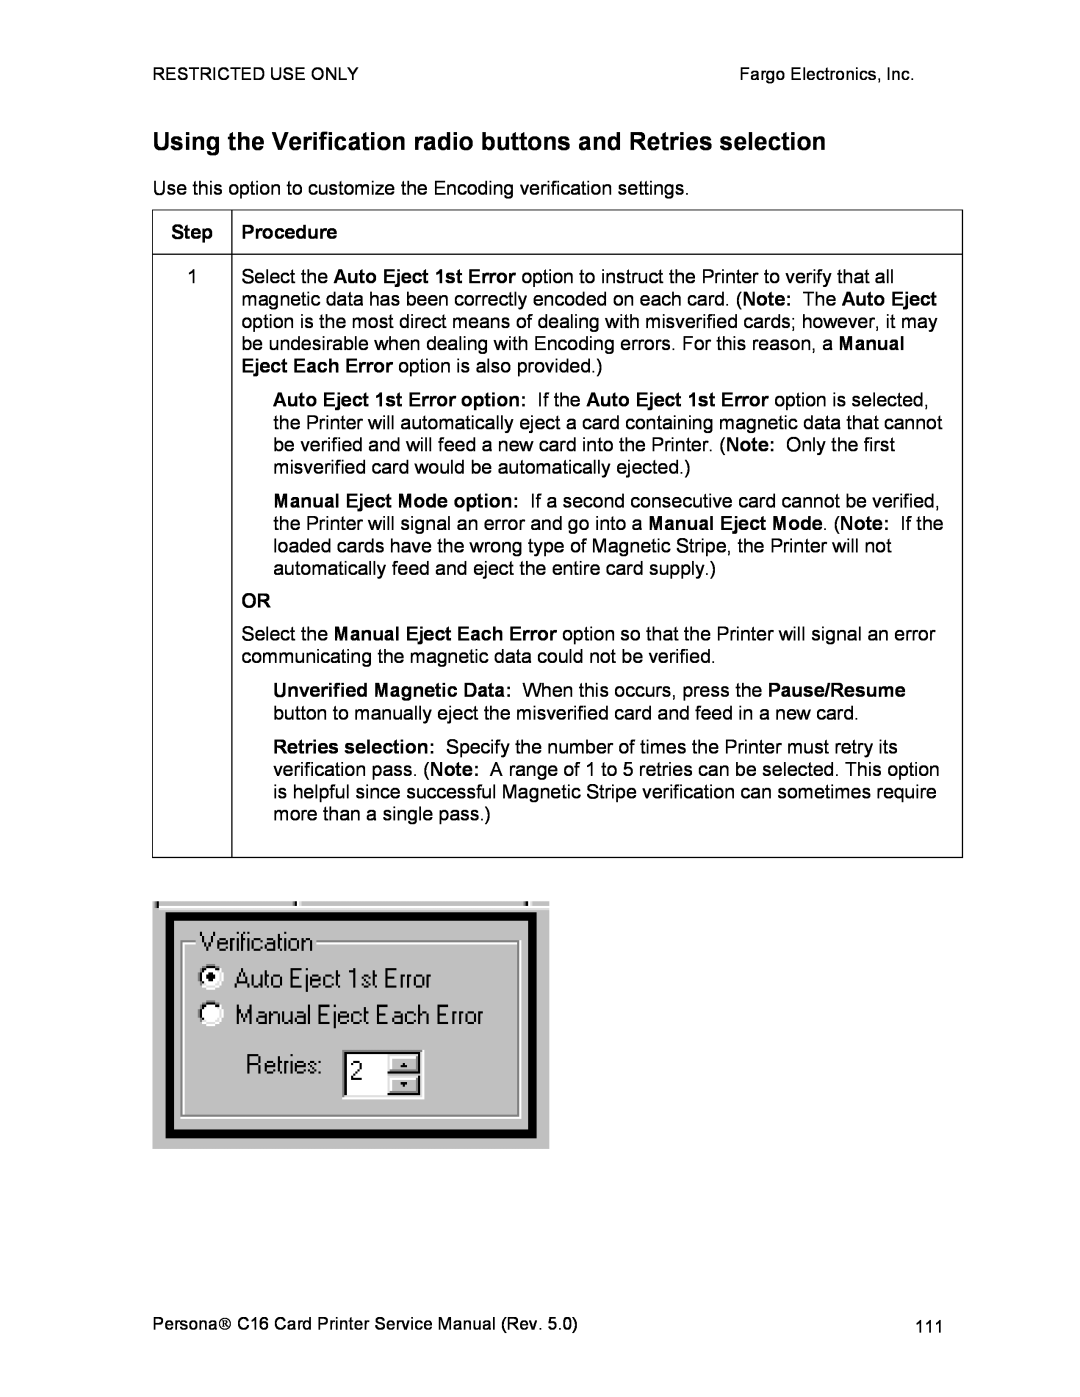 FARGO electronic C16 service manual Using the Verification radio buttons and Retries selection 